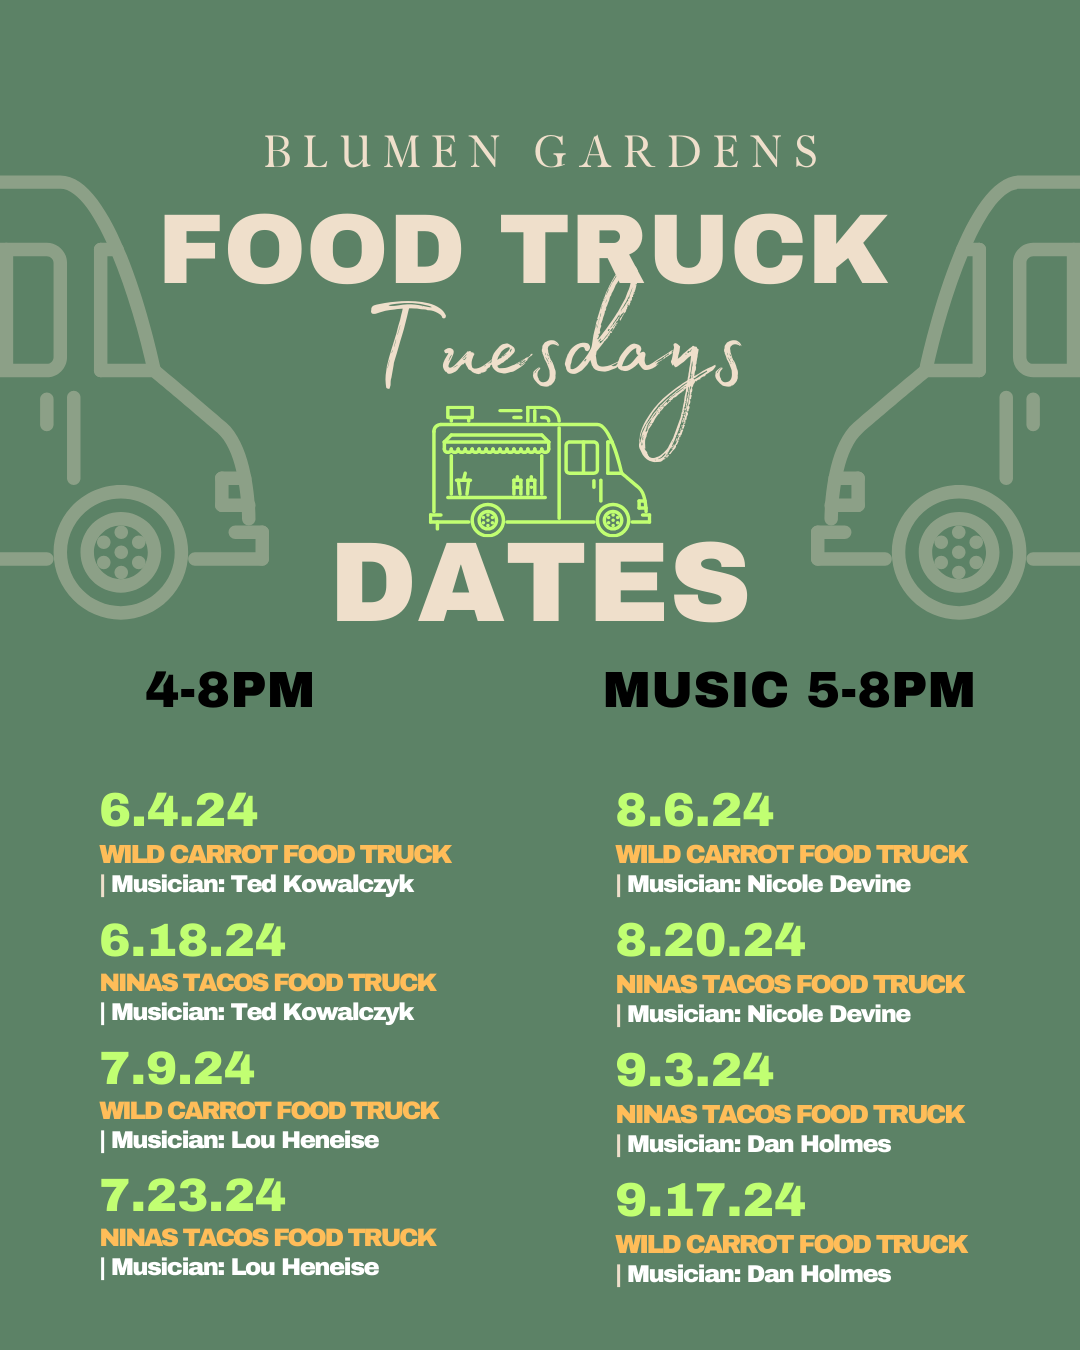 Food Truck Tuesday at Blumen Gardens- Tuesday, June 4th- 4-8PM